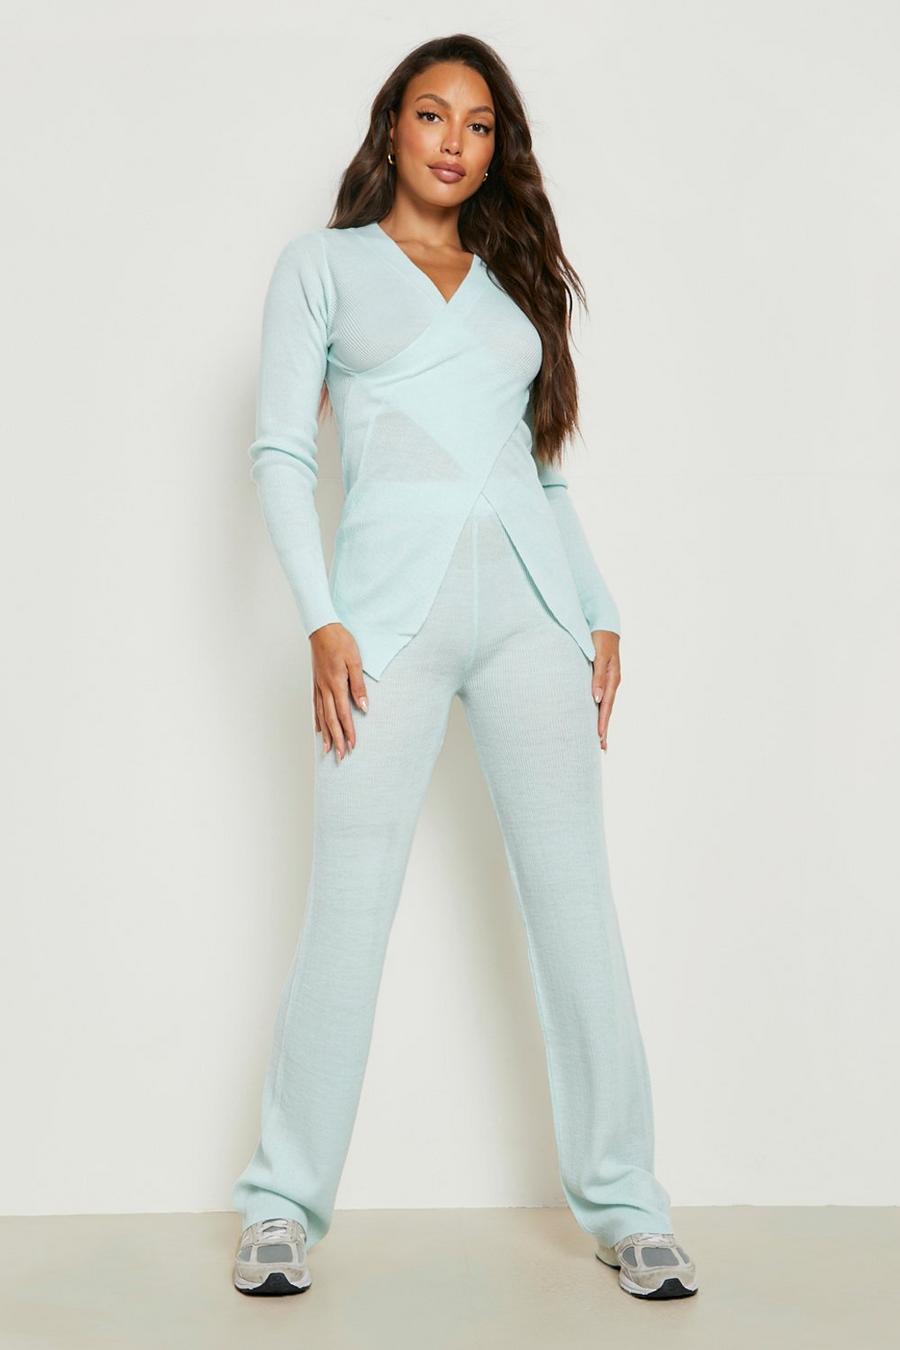 Aqua blue Tall Knitted Wrap Jumper And Trouser Co-ord